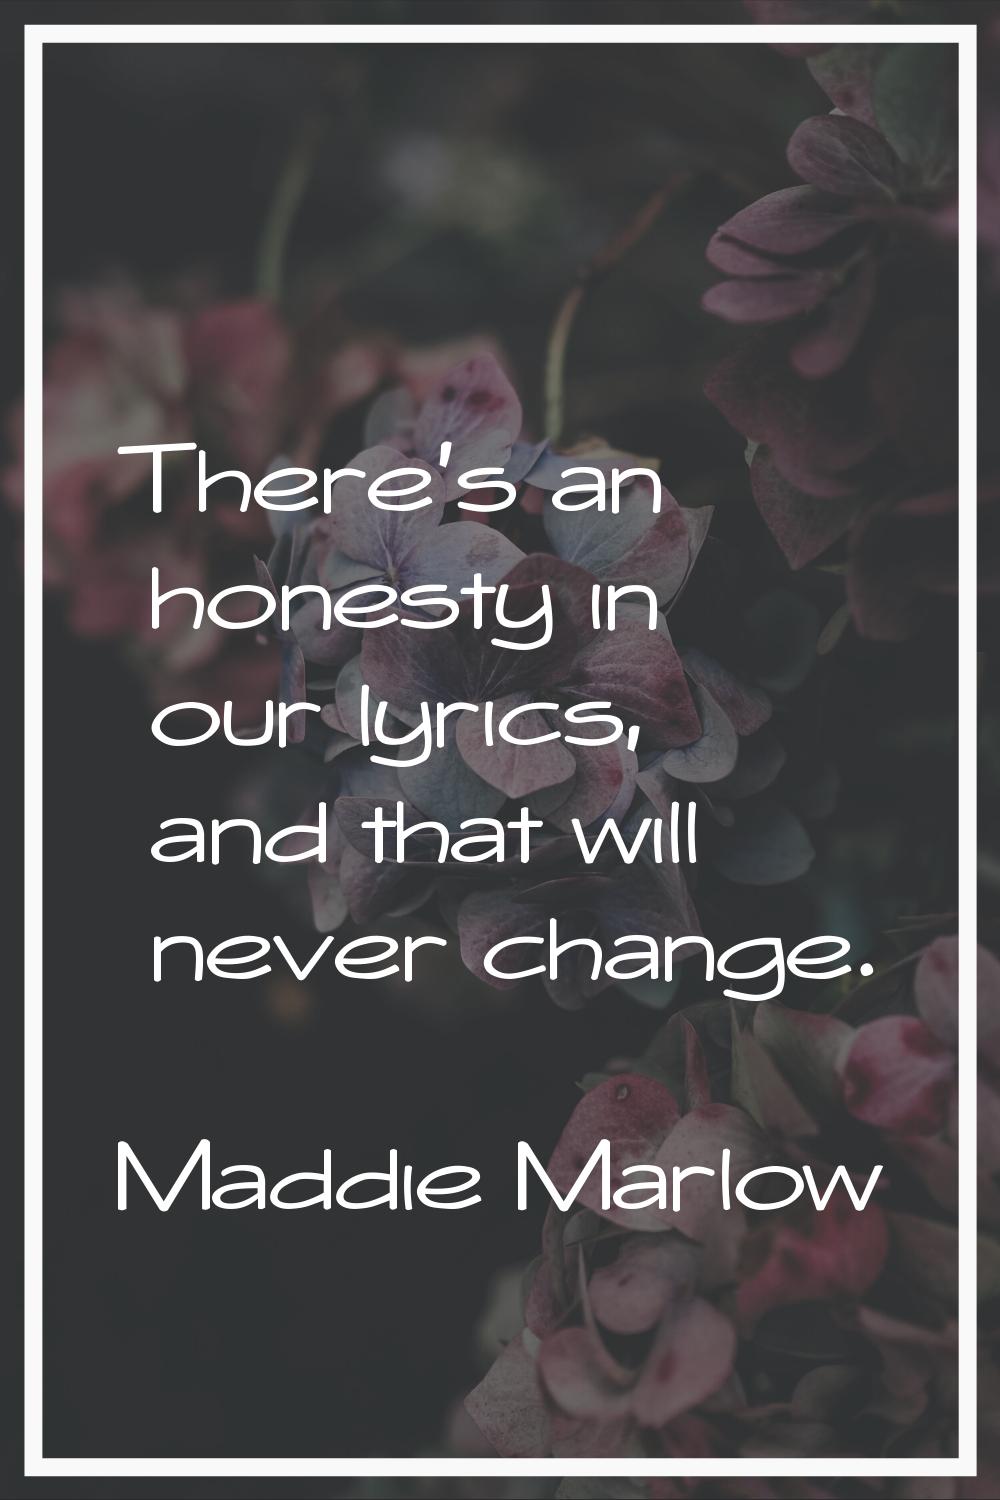 There's an honesty in our lyrics, and that will never change.